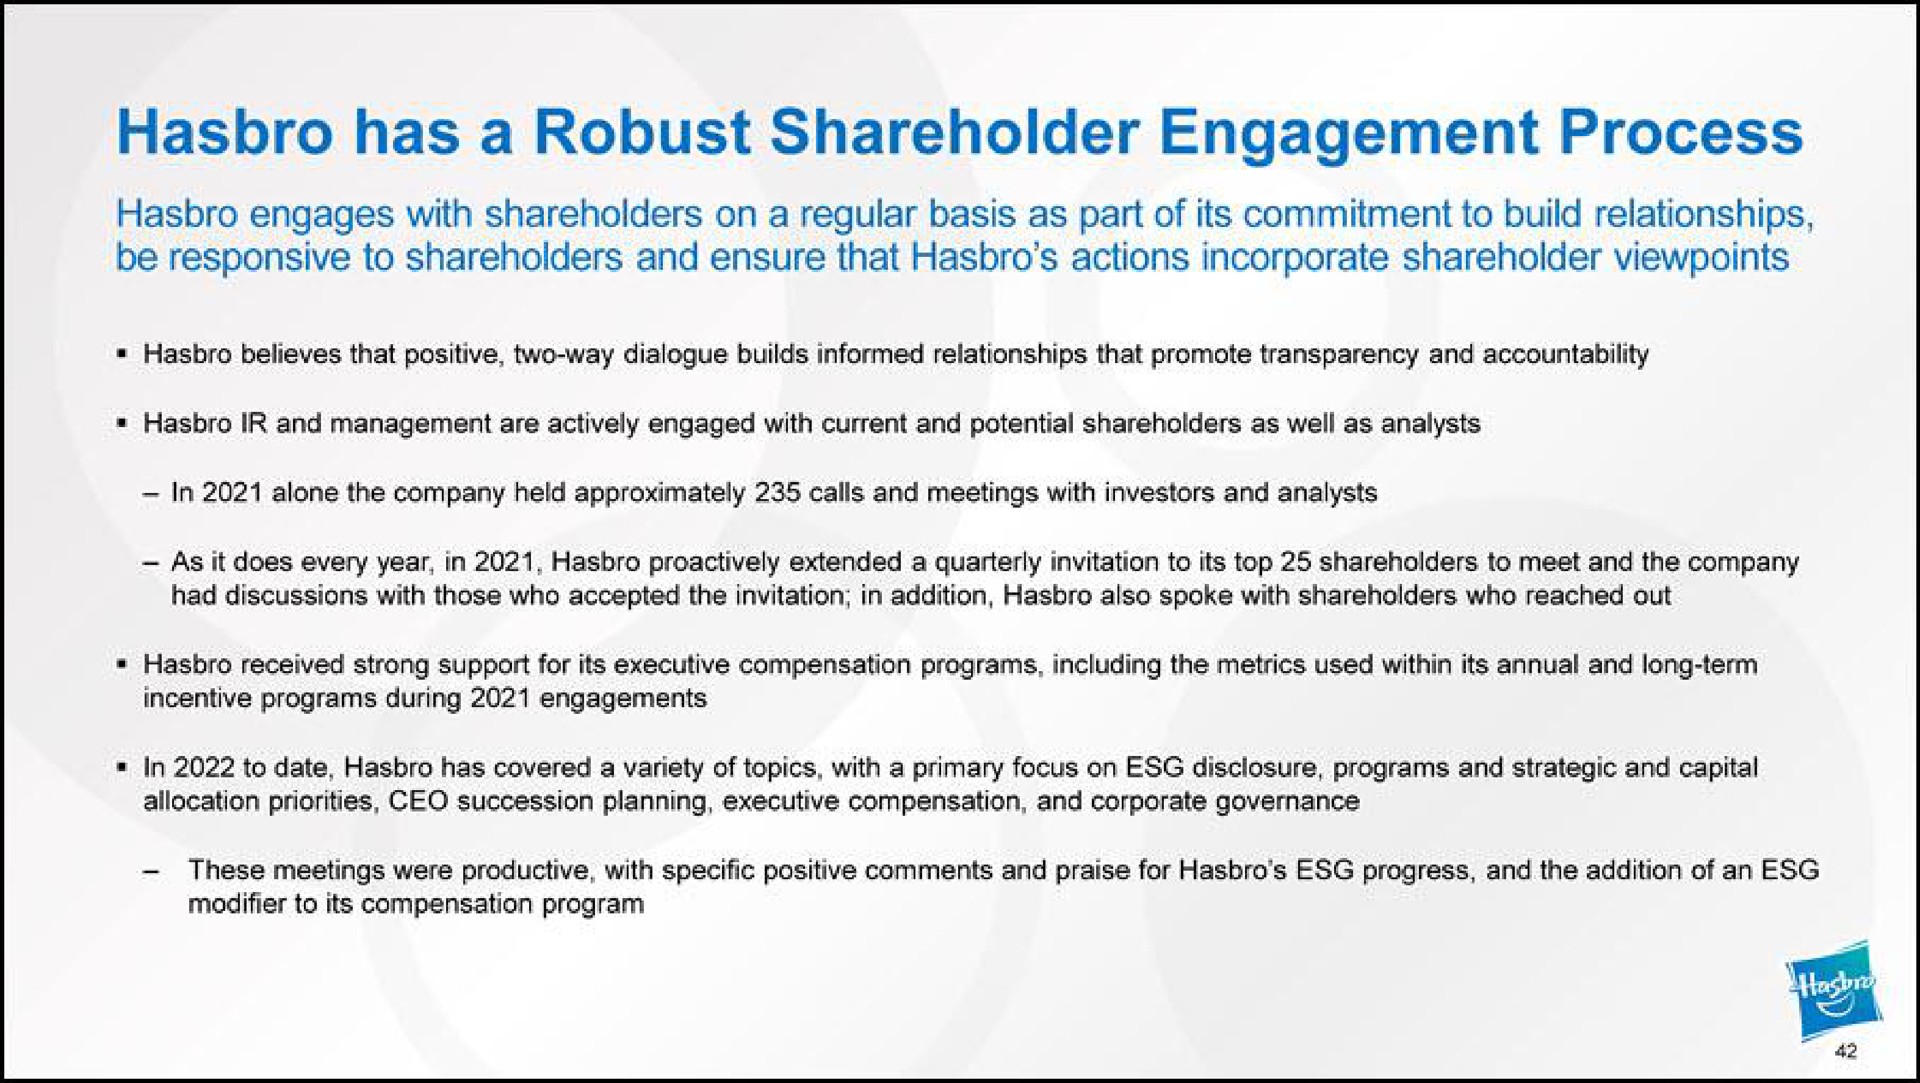 has a robust shareholder engagement process engages with shareholders on a regular basis as part of its commitment to build relationships be responsive to shareholders and ensure that actions incorporate shareholder viewpoints | Hasbro